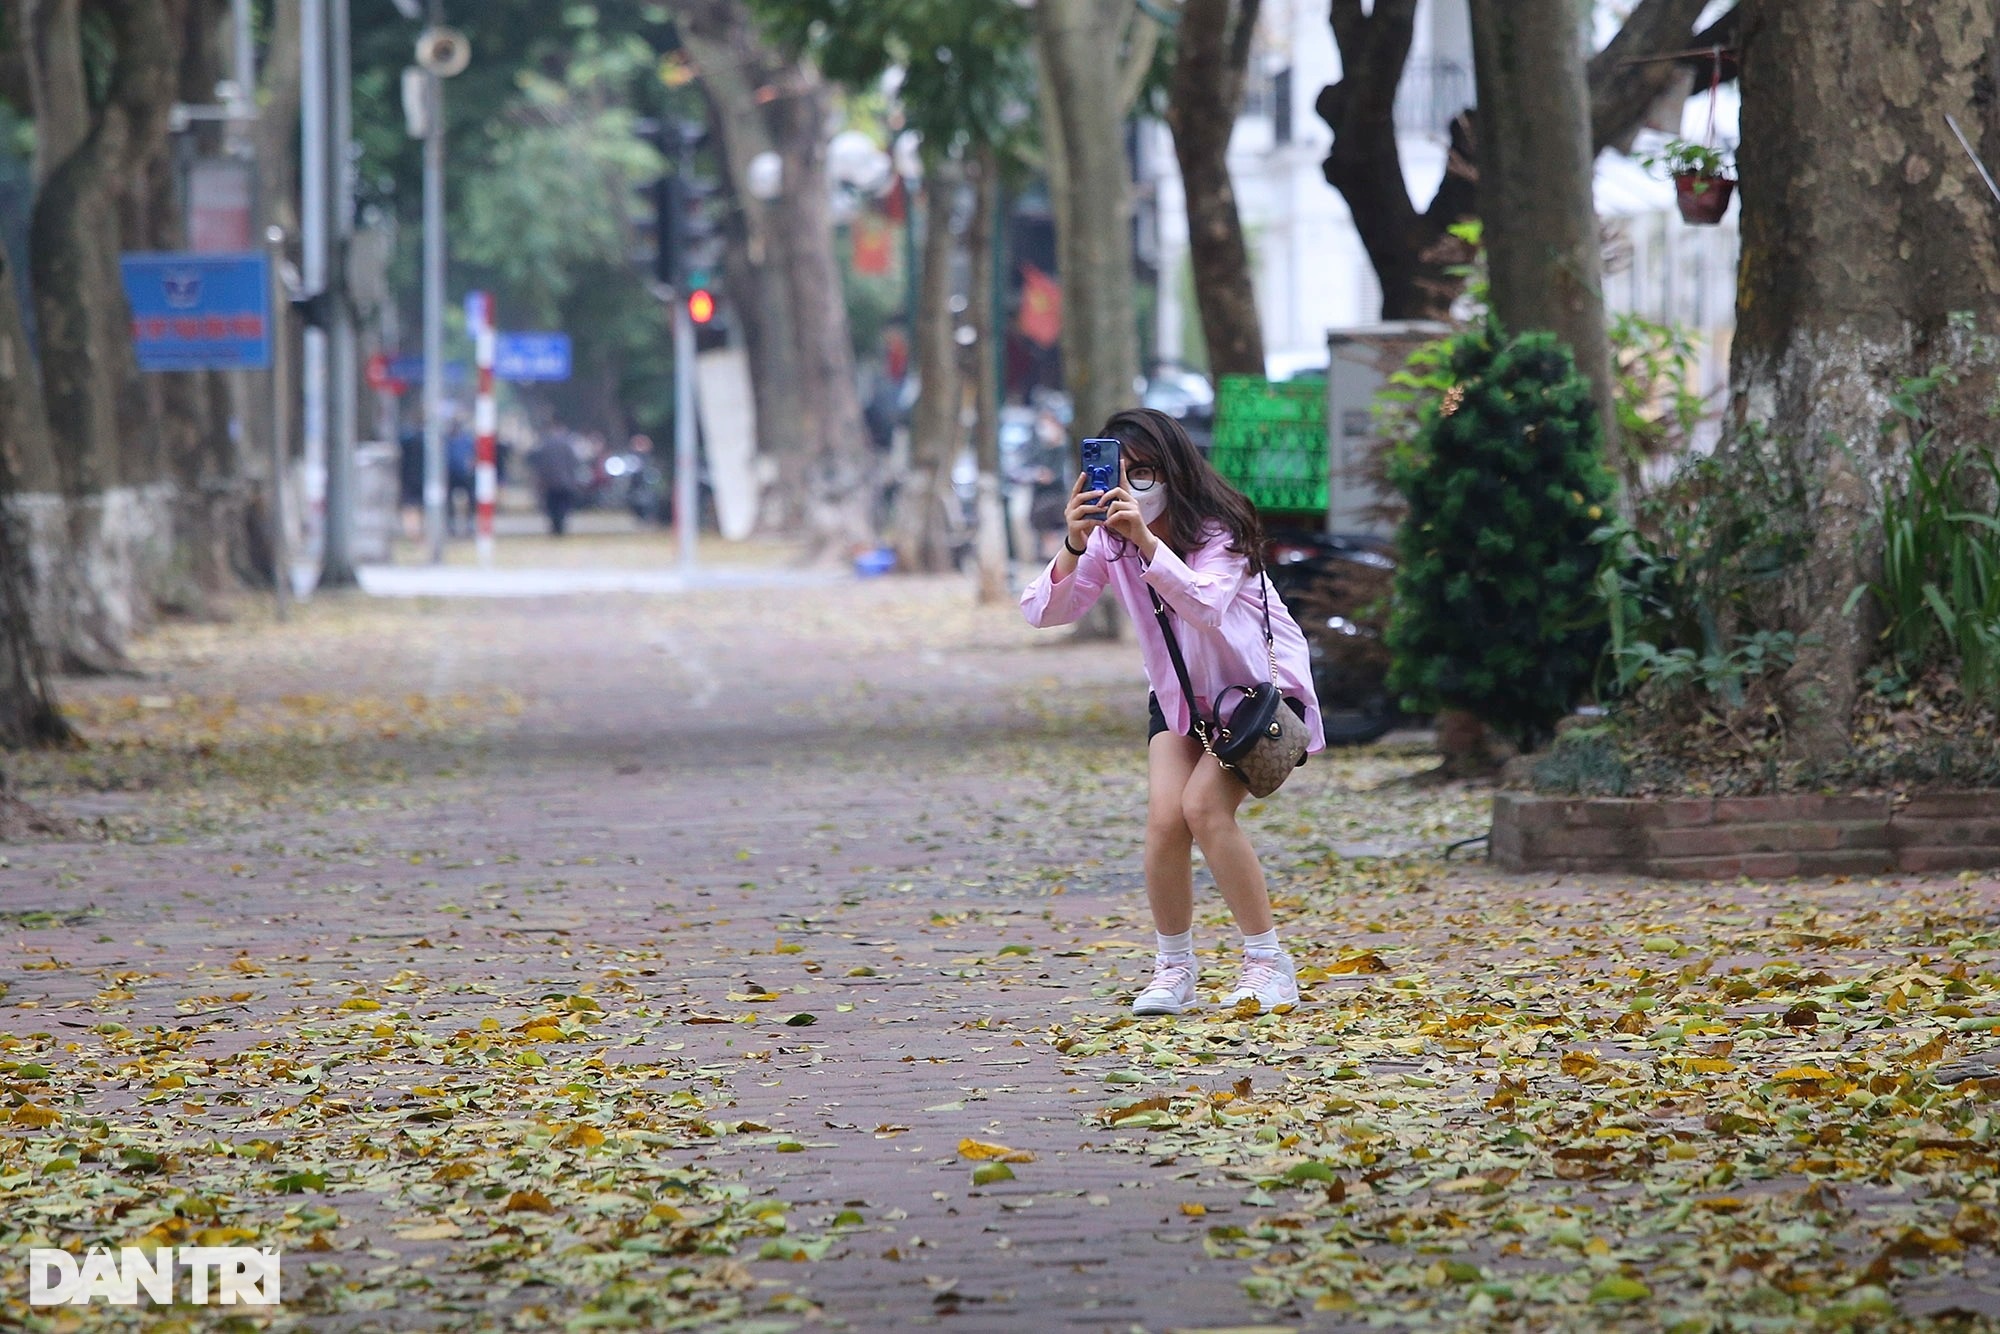 Hanoi is golden in the season when the trees change leaves, young people flock to take pictures - 11